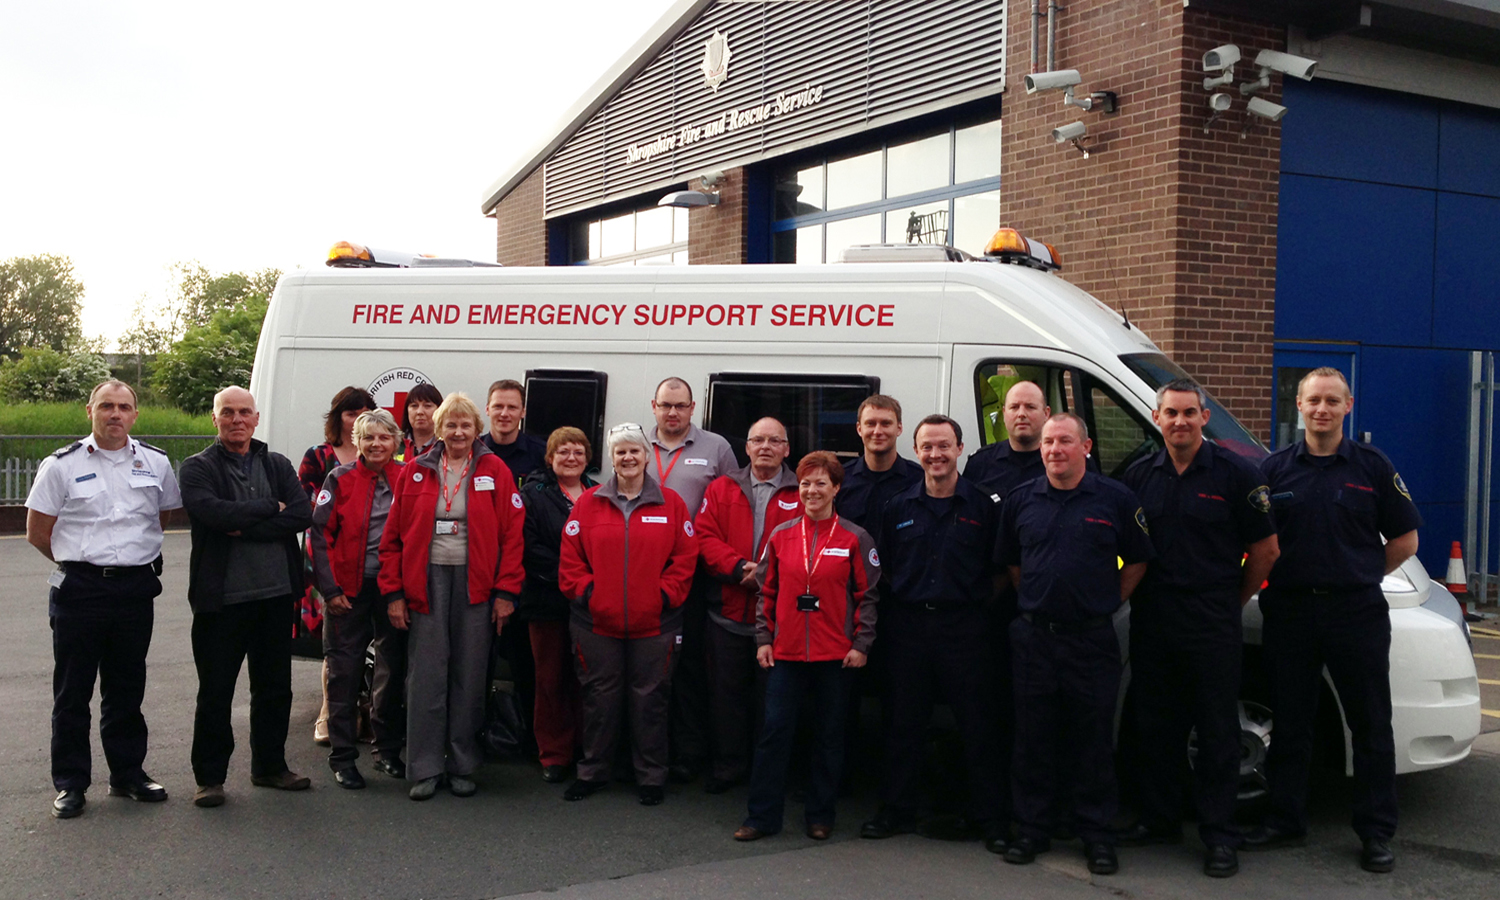 Volunteers with members of White Watch Shrewsbury and (far left) Chief Fire Officer John Redmond and Red Cross operations director Andrew Strong.